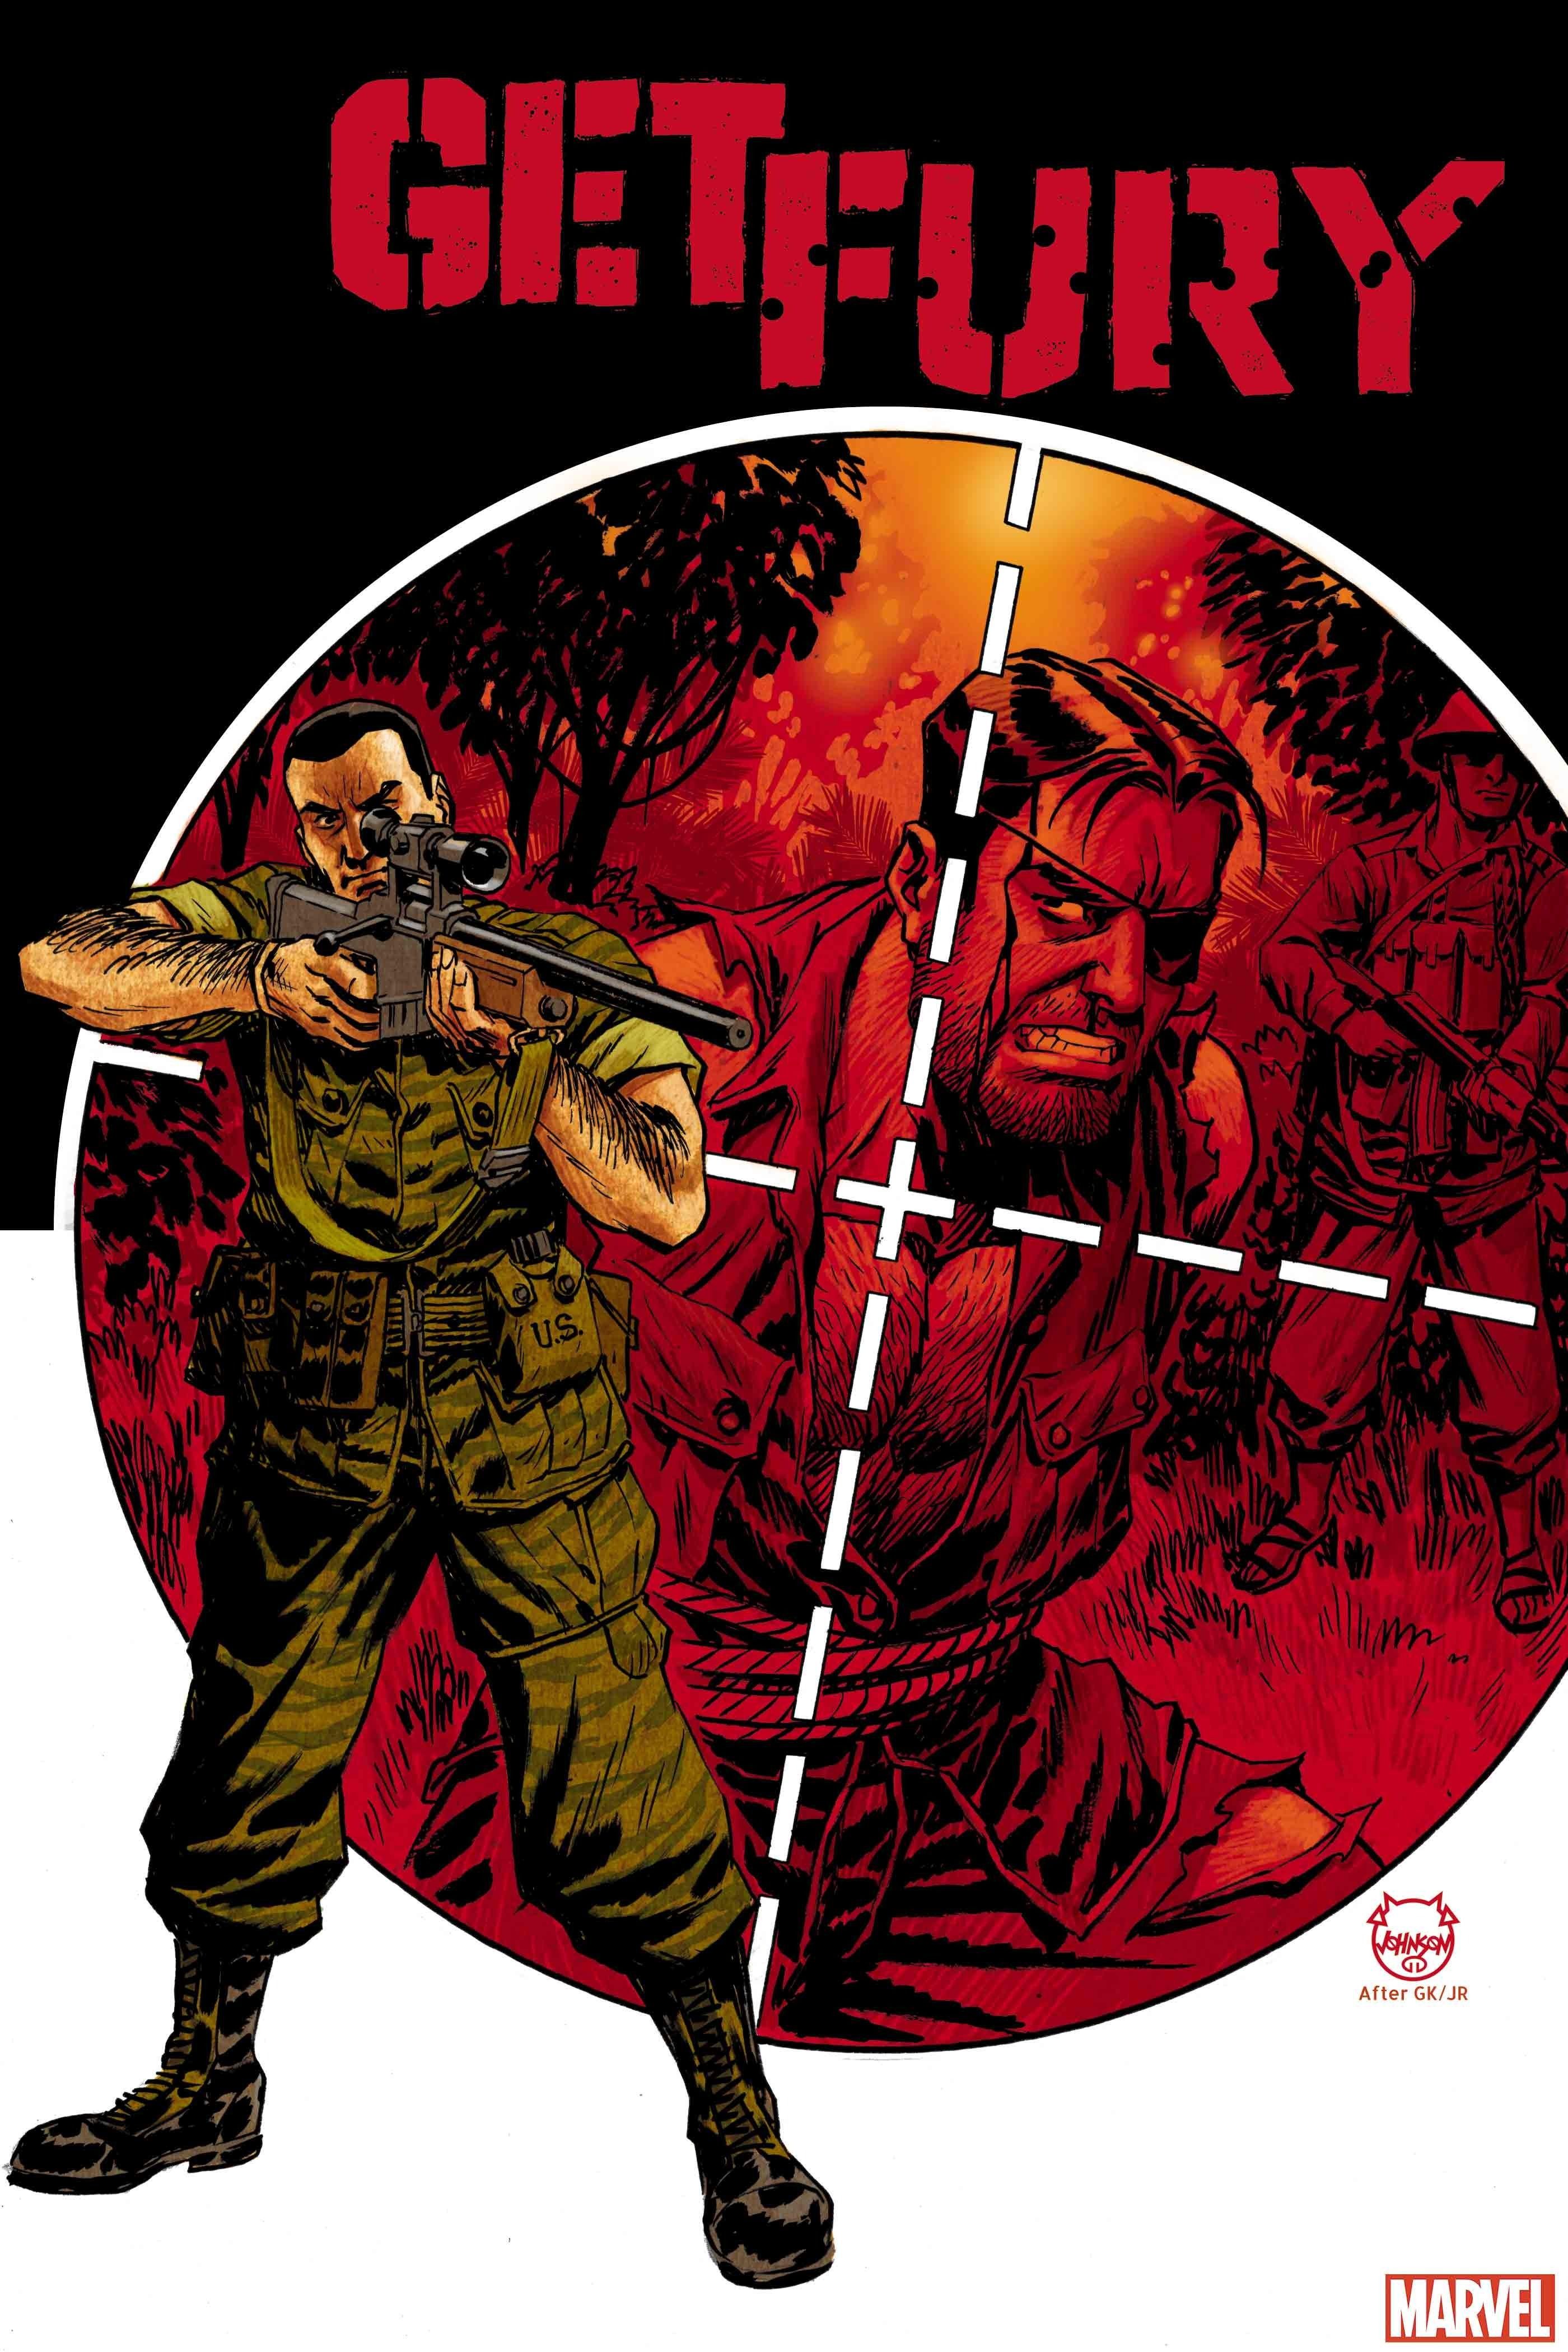 The cover of Get Fury #1